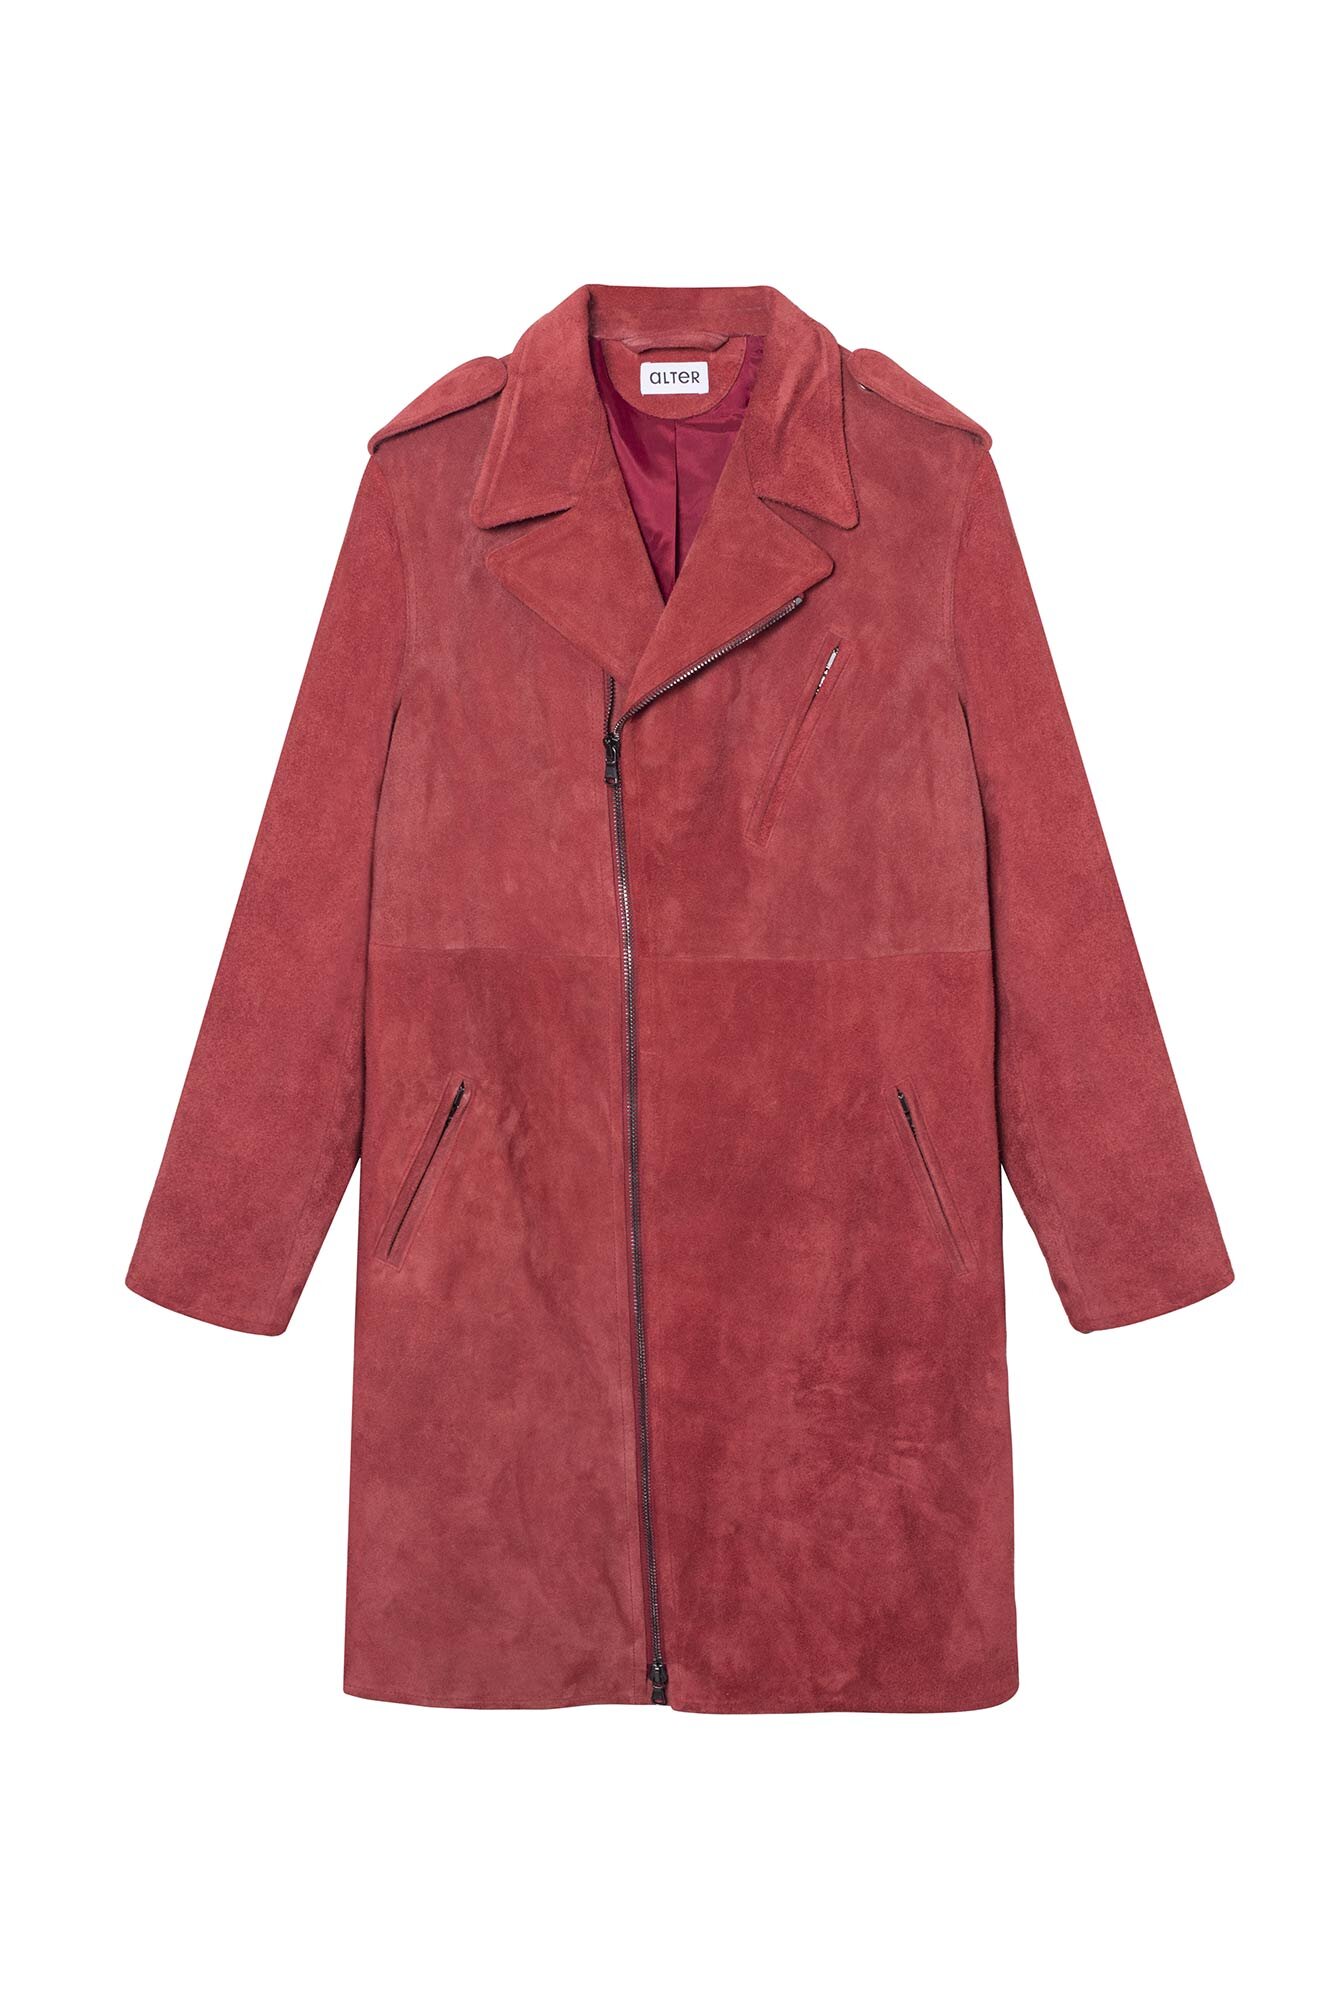 Alter Designs Long Jacket in Red Suede Leather.jpg